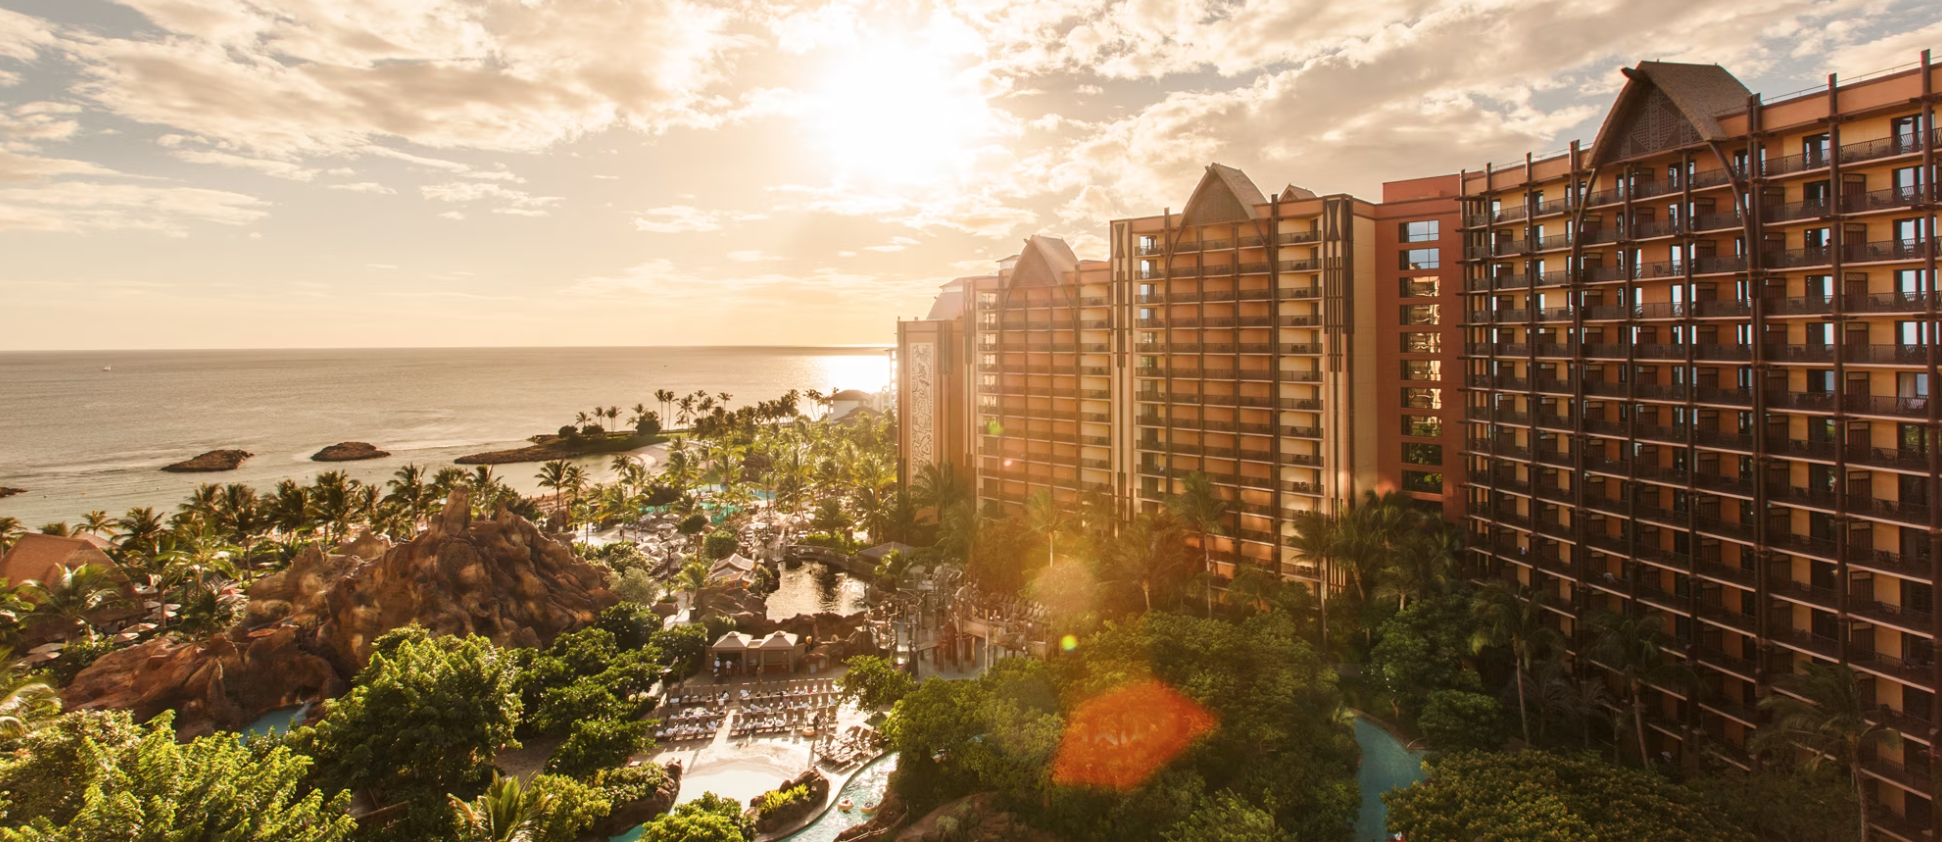 Photo of Aulani building and ocean with sparkling sun from Disney Vacation Club website